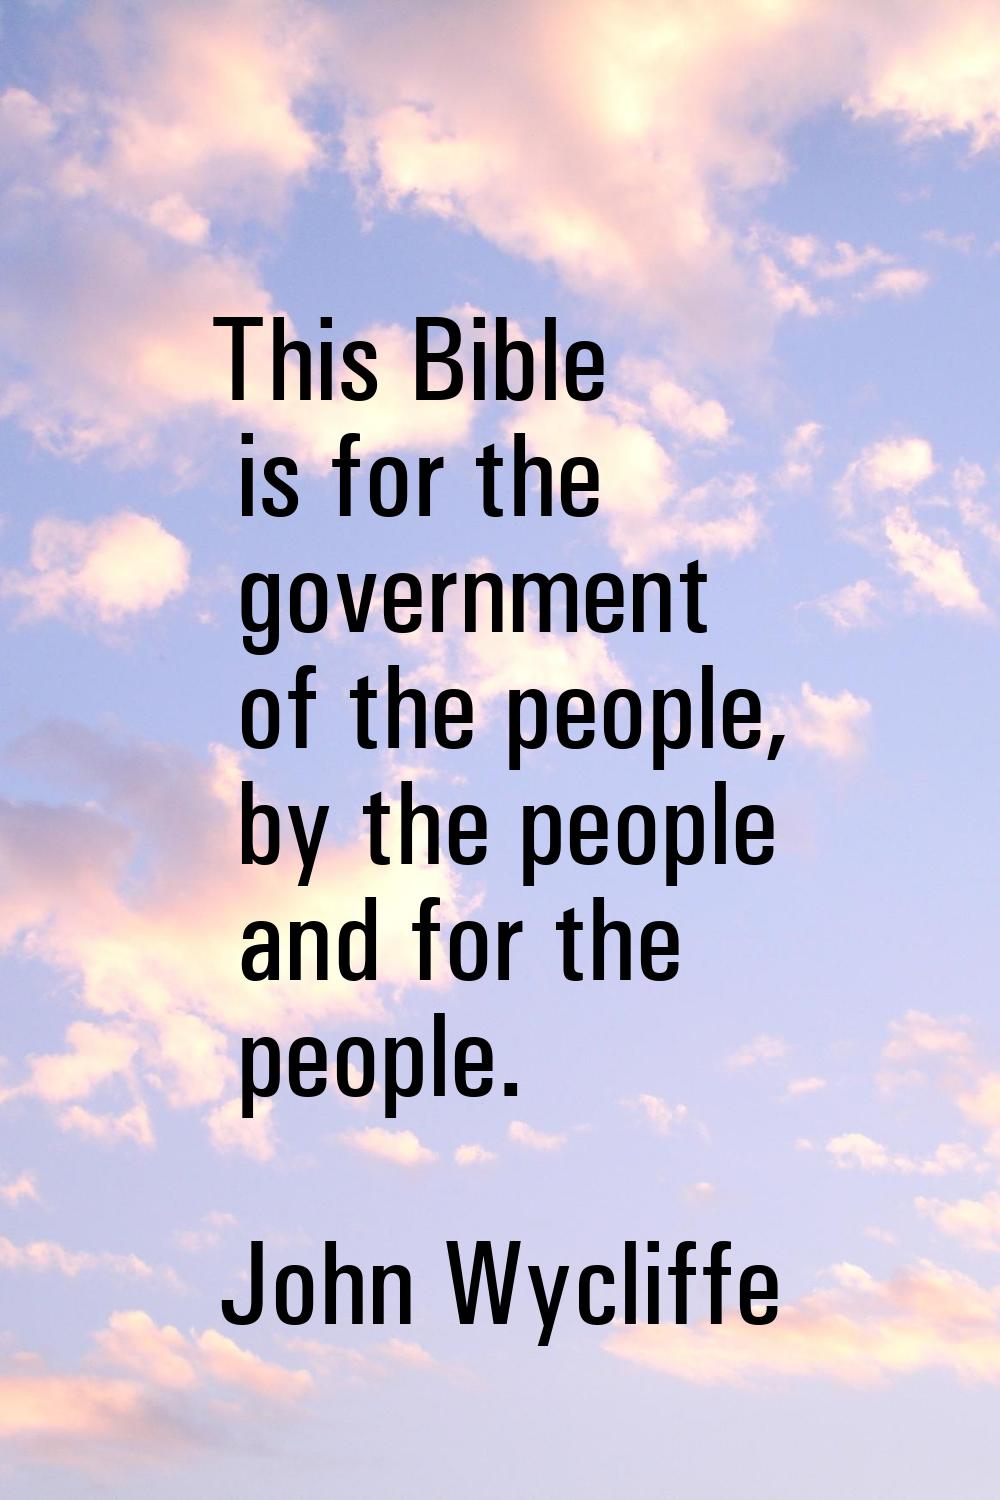 This Bible is for the government of the people, by the people and for the people.